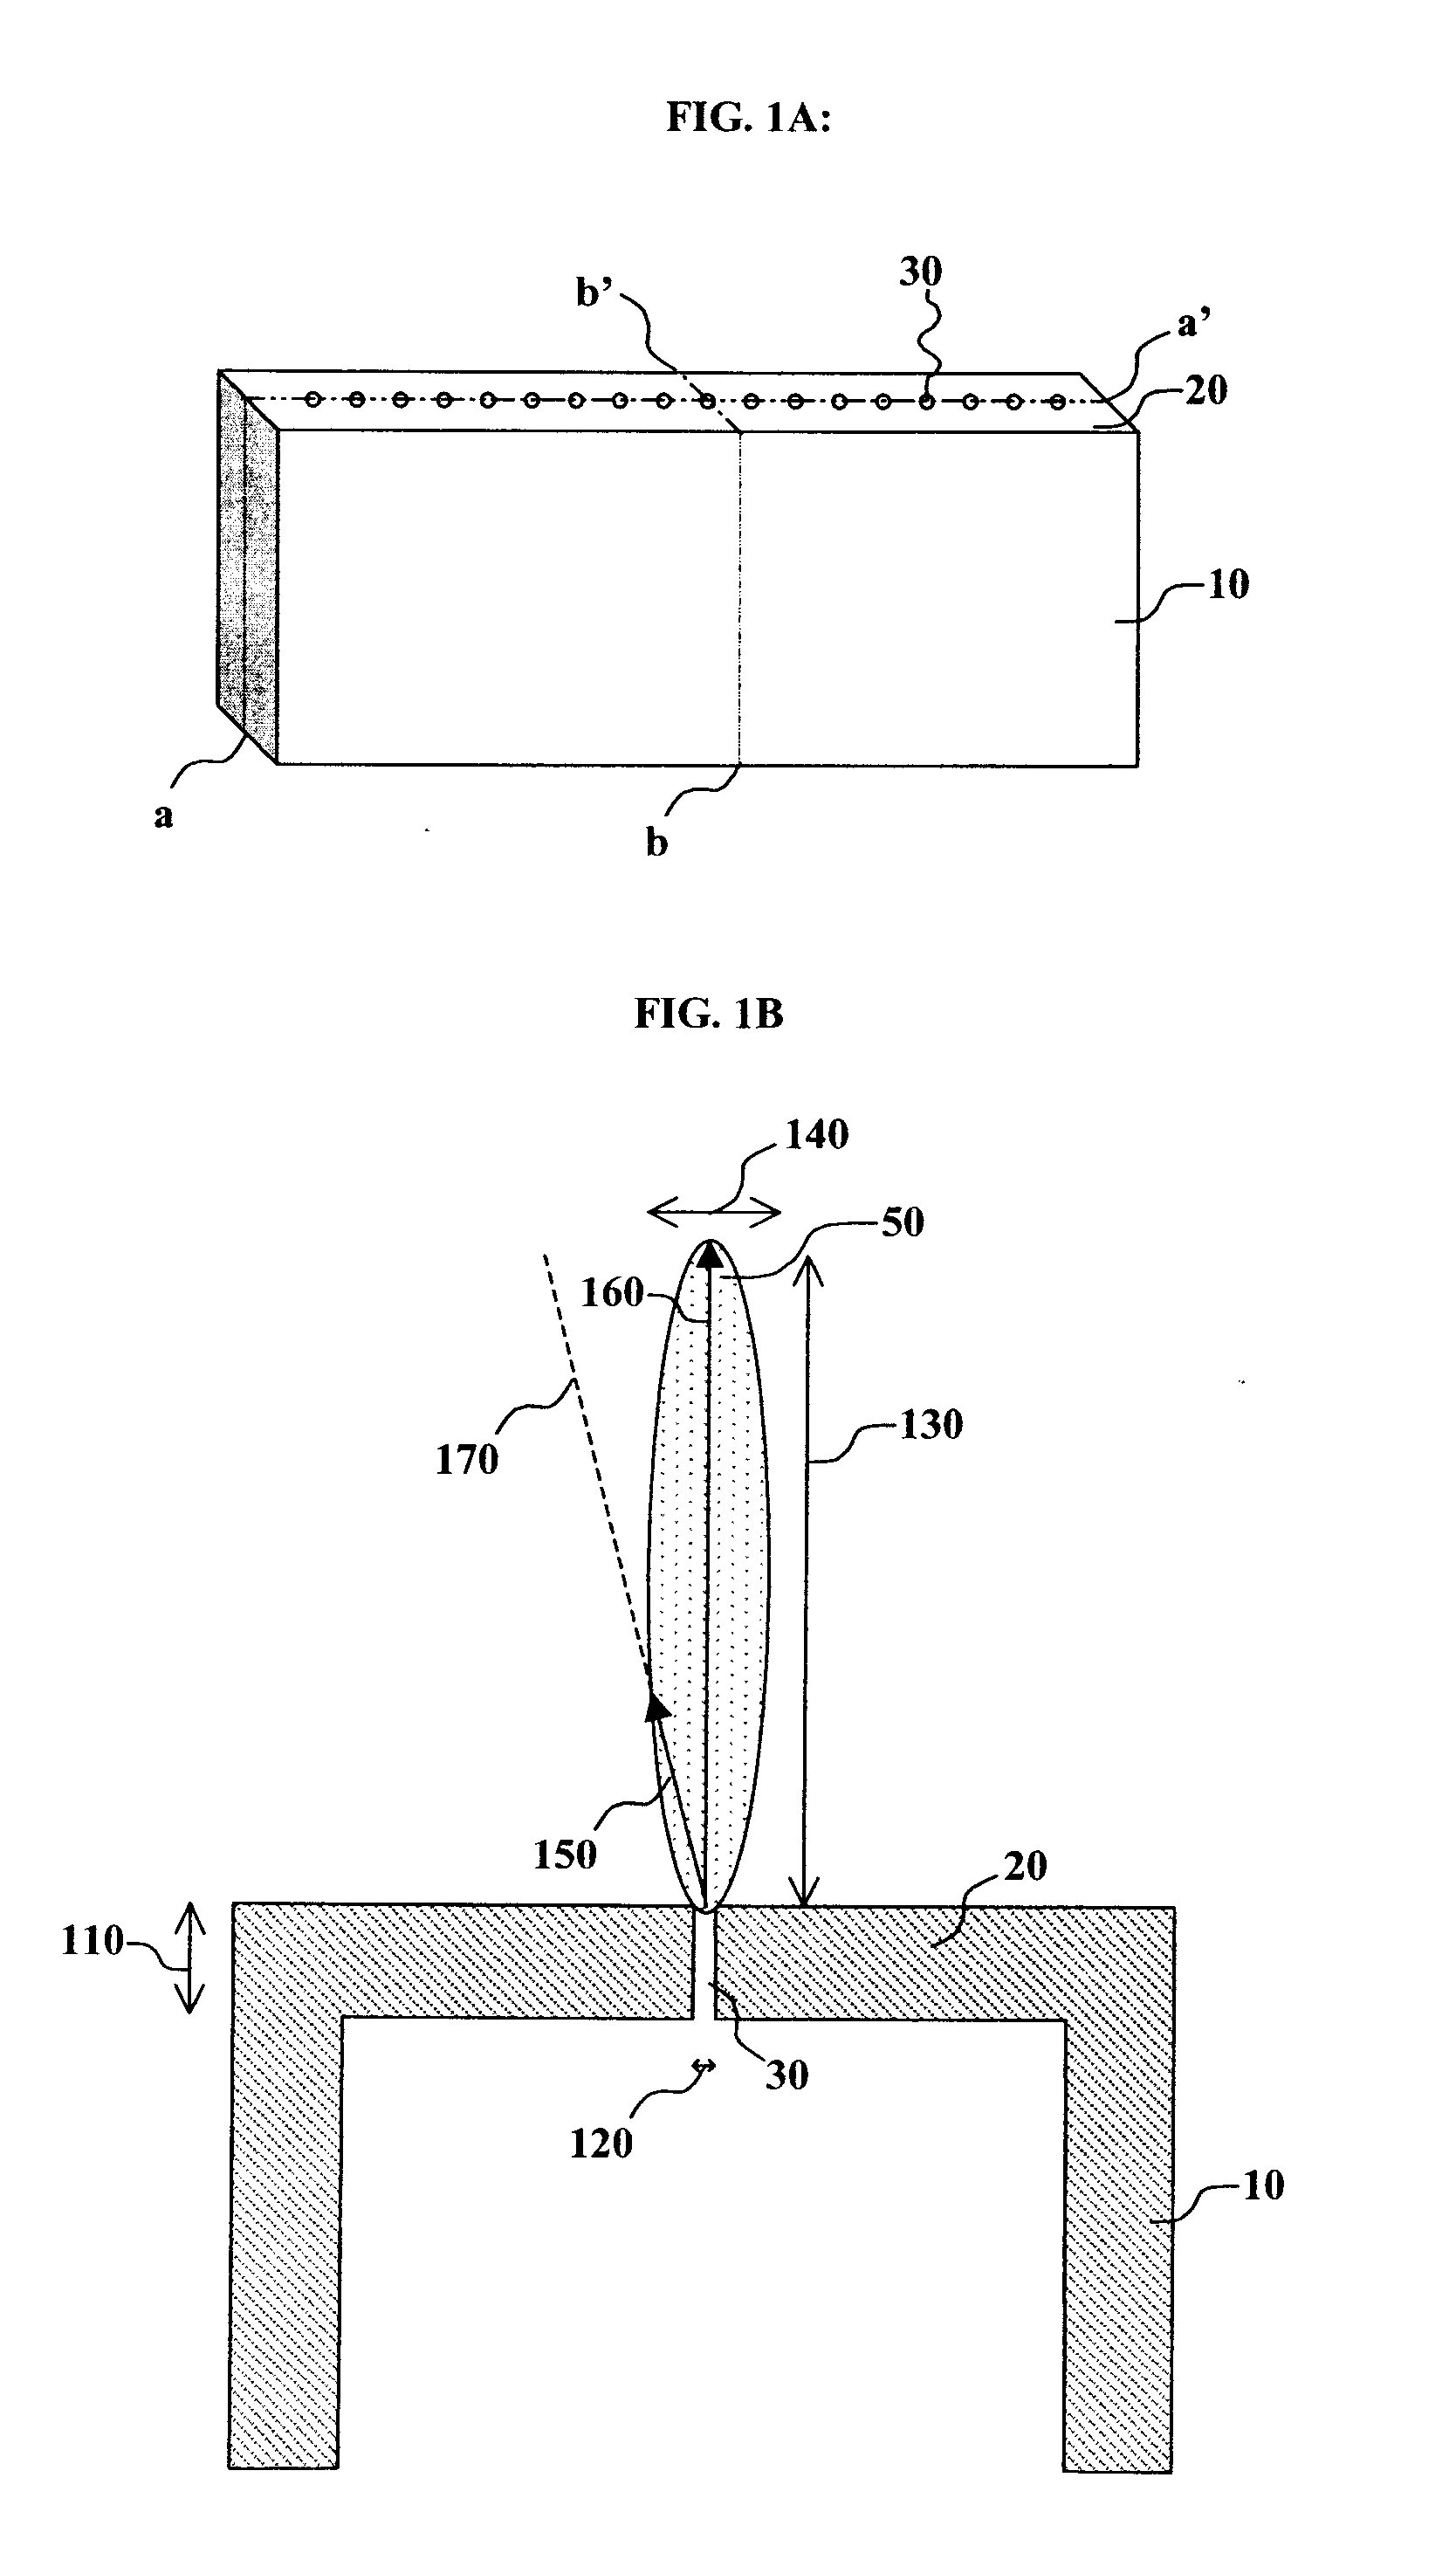 Depositing organic material onto an OLED substrate